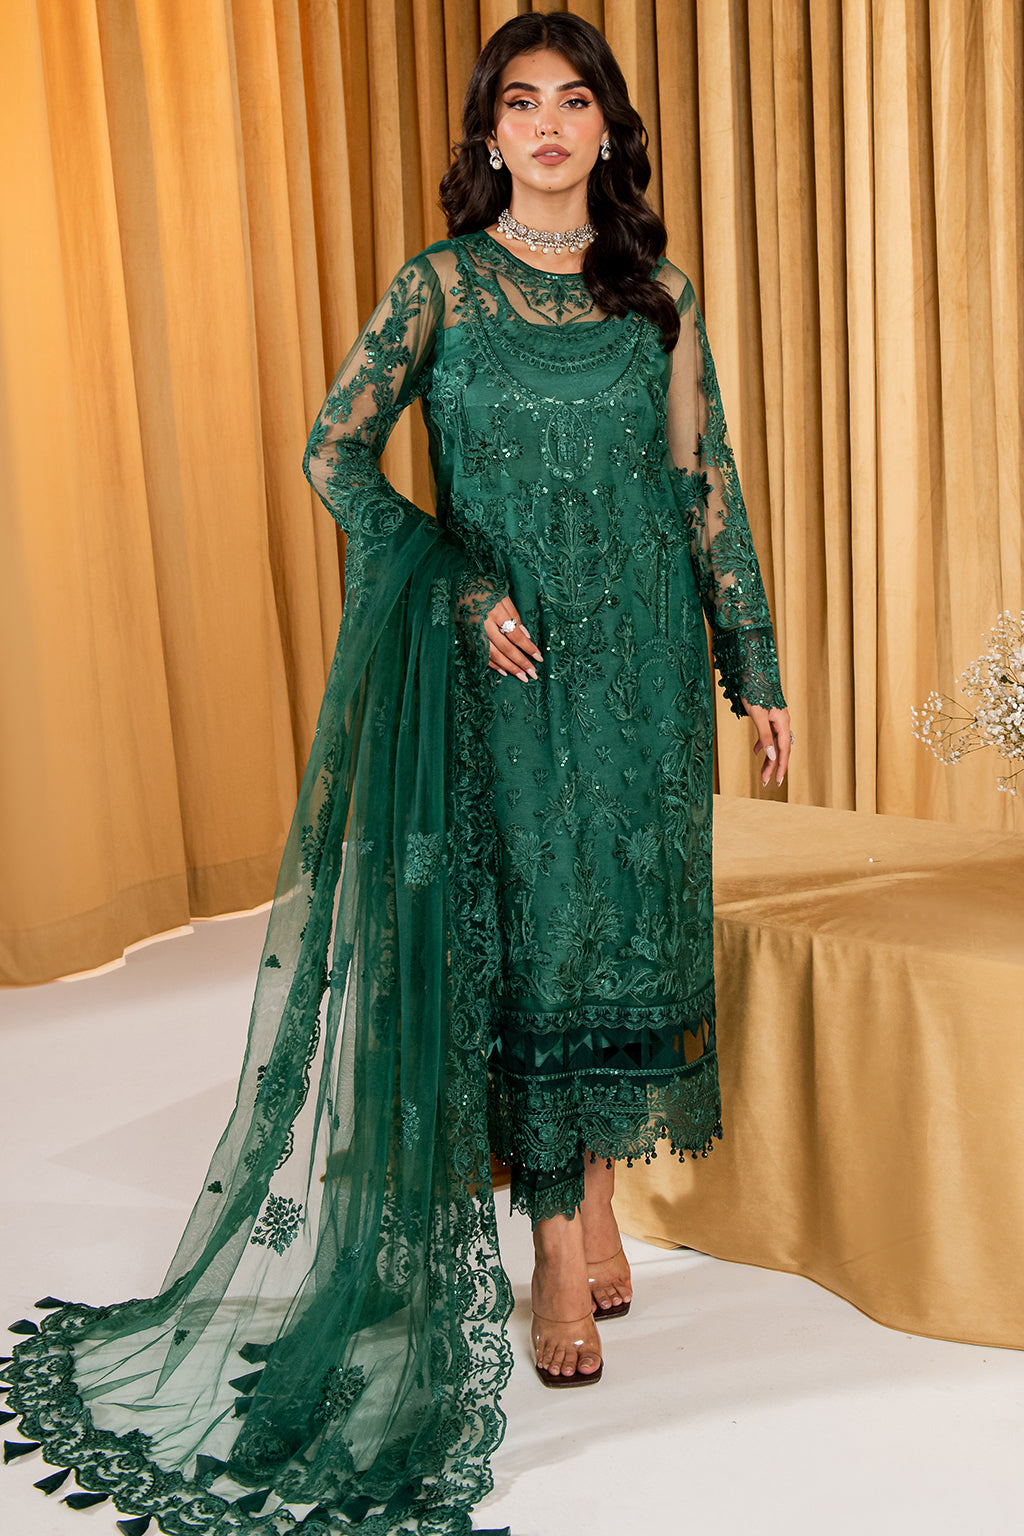 Dastaan By Neeshay Embroidered Net Suits Unstitched 3 Piece Zamurd